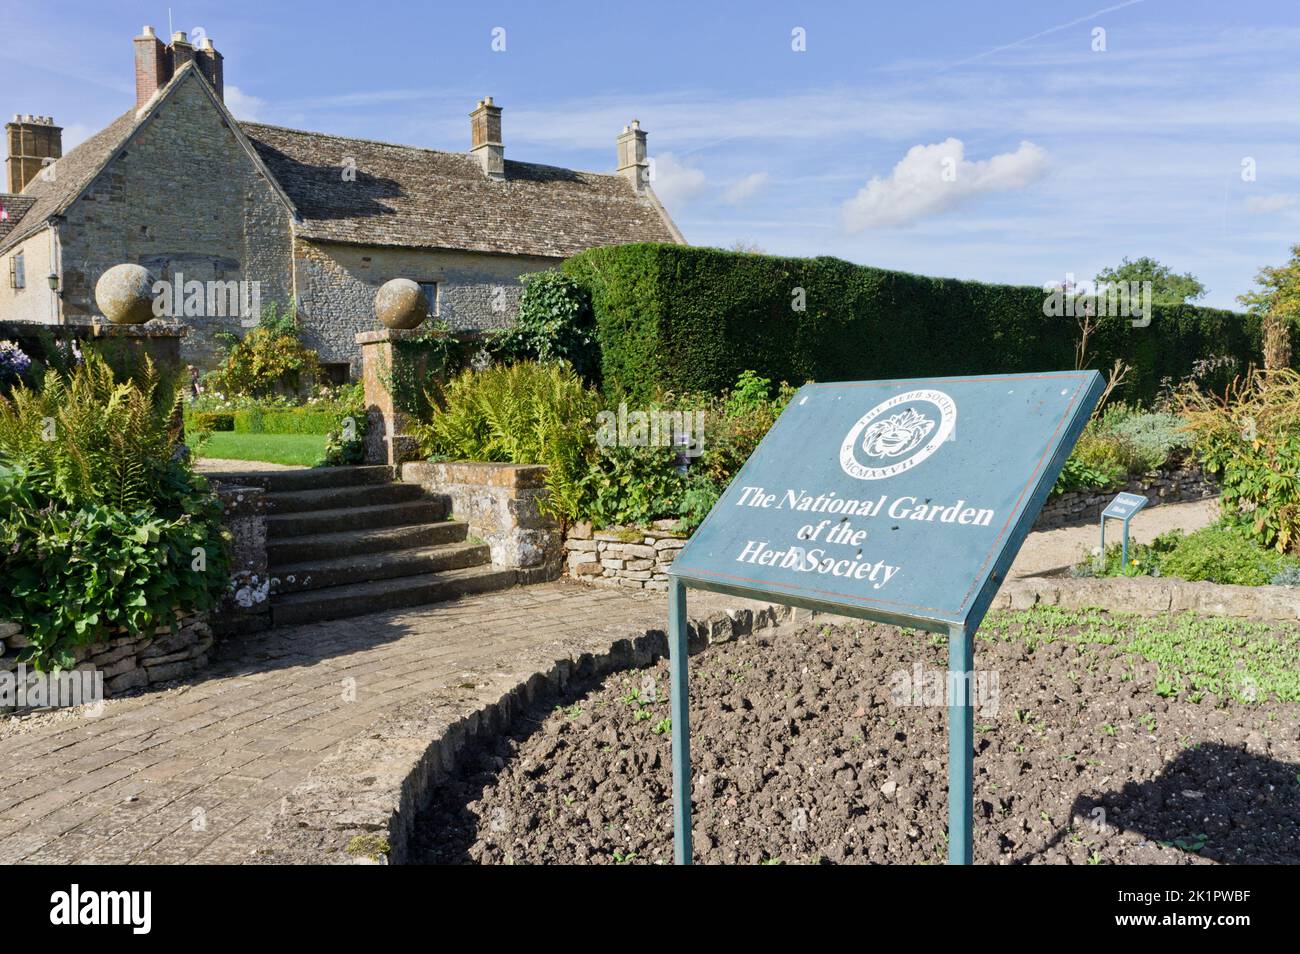 Signage for the National Garden of the Herb Society situated in the grounds of Sulgrave Manor, Northamptonshire, UK Stock Photo